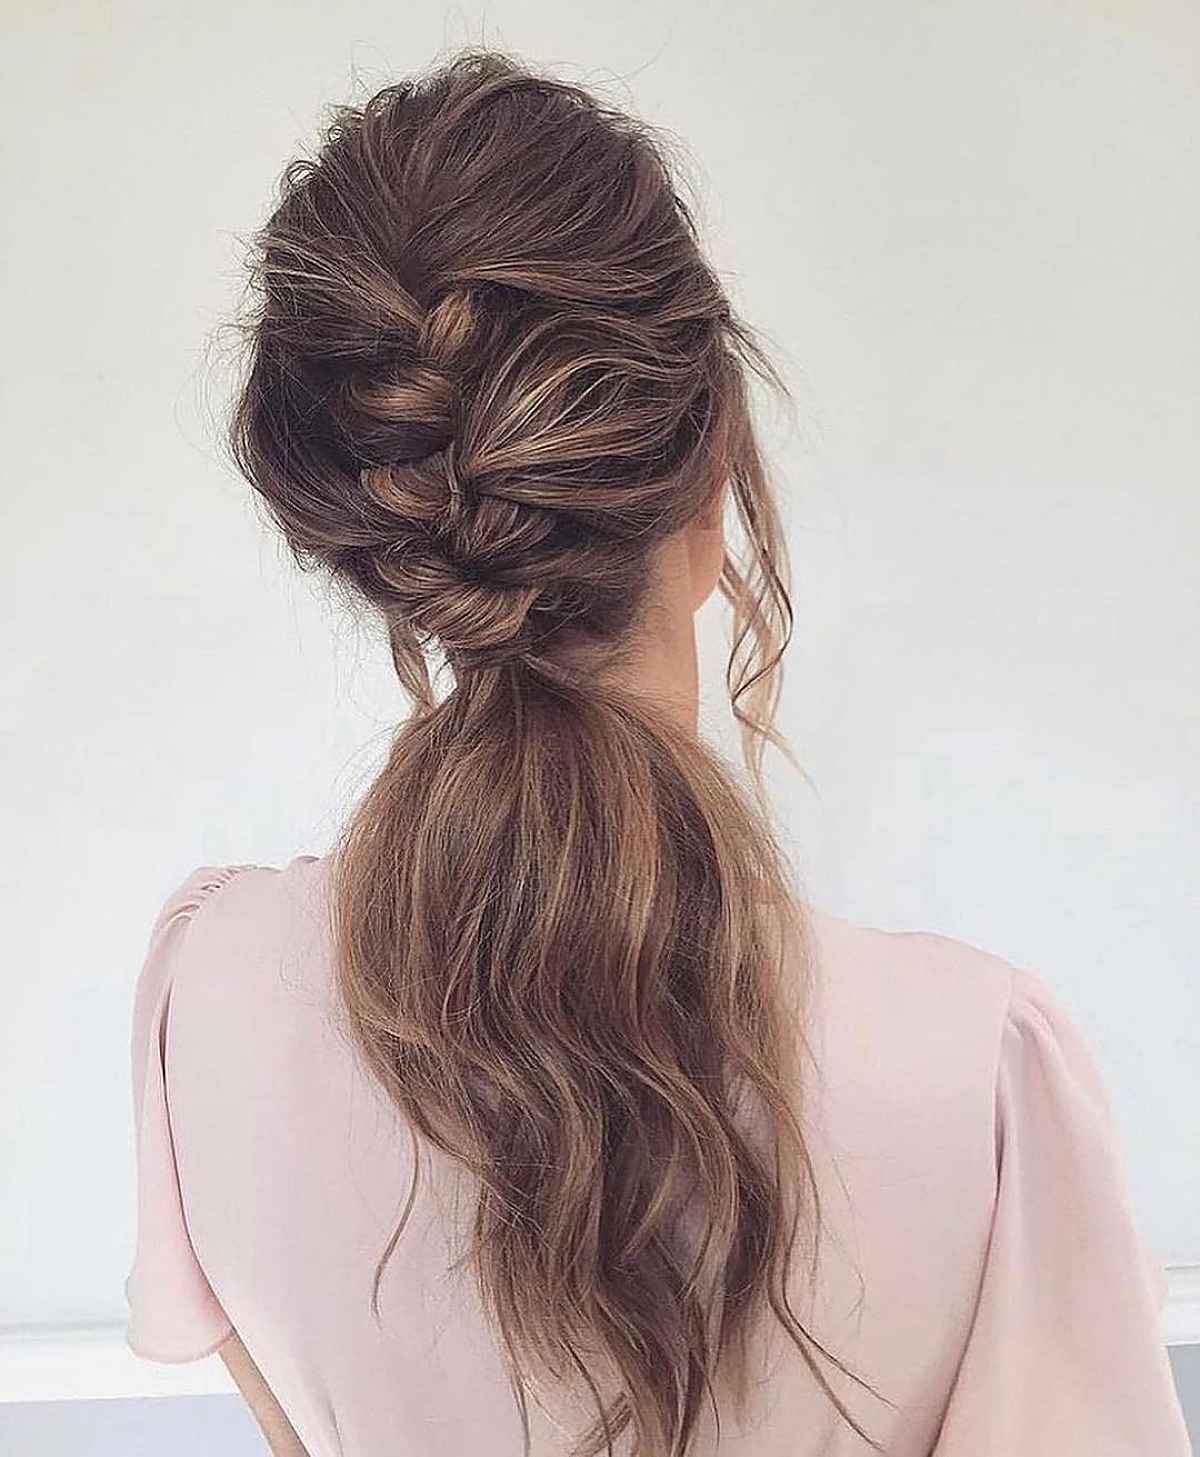 Soft Fishtail Braid for a Pony Hairstyle